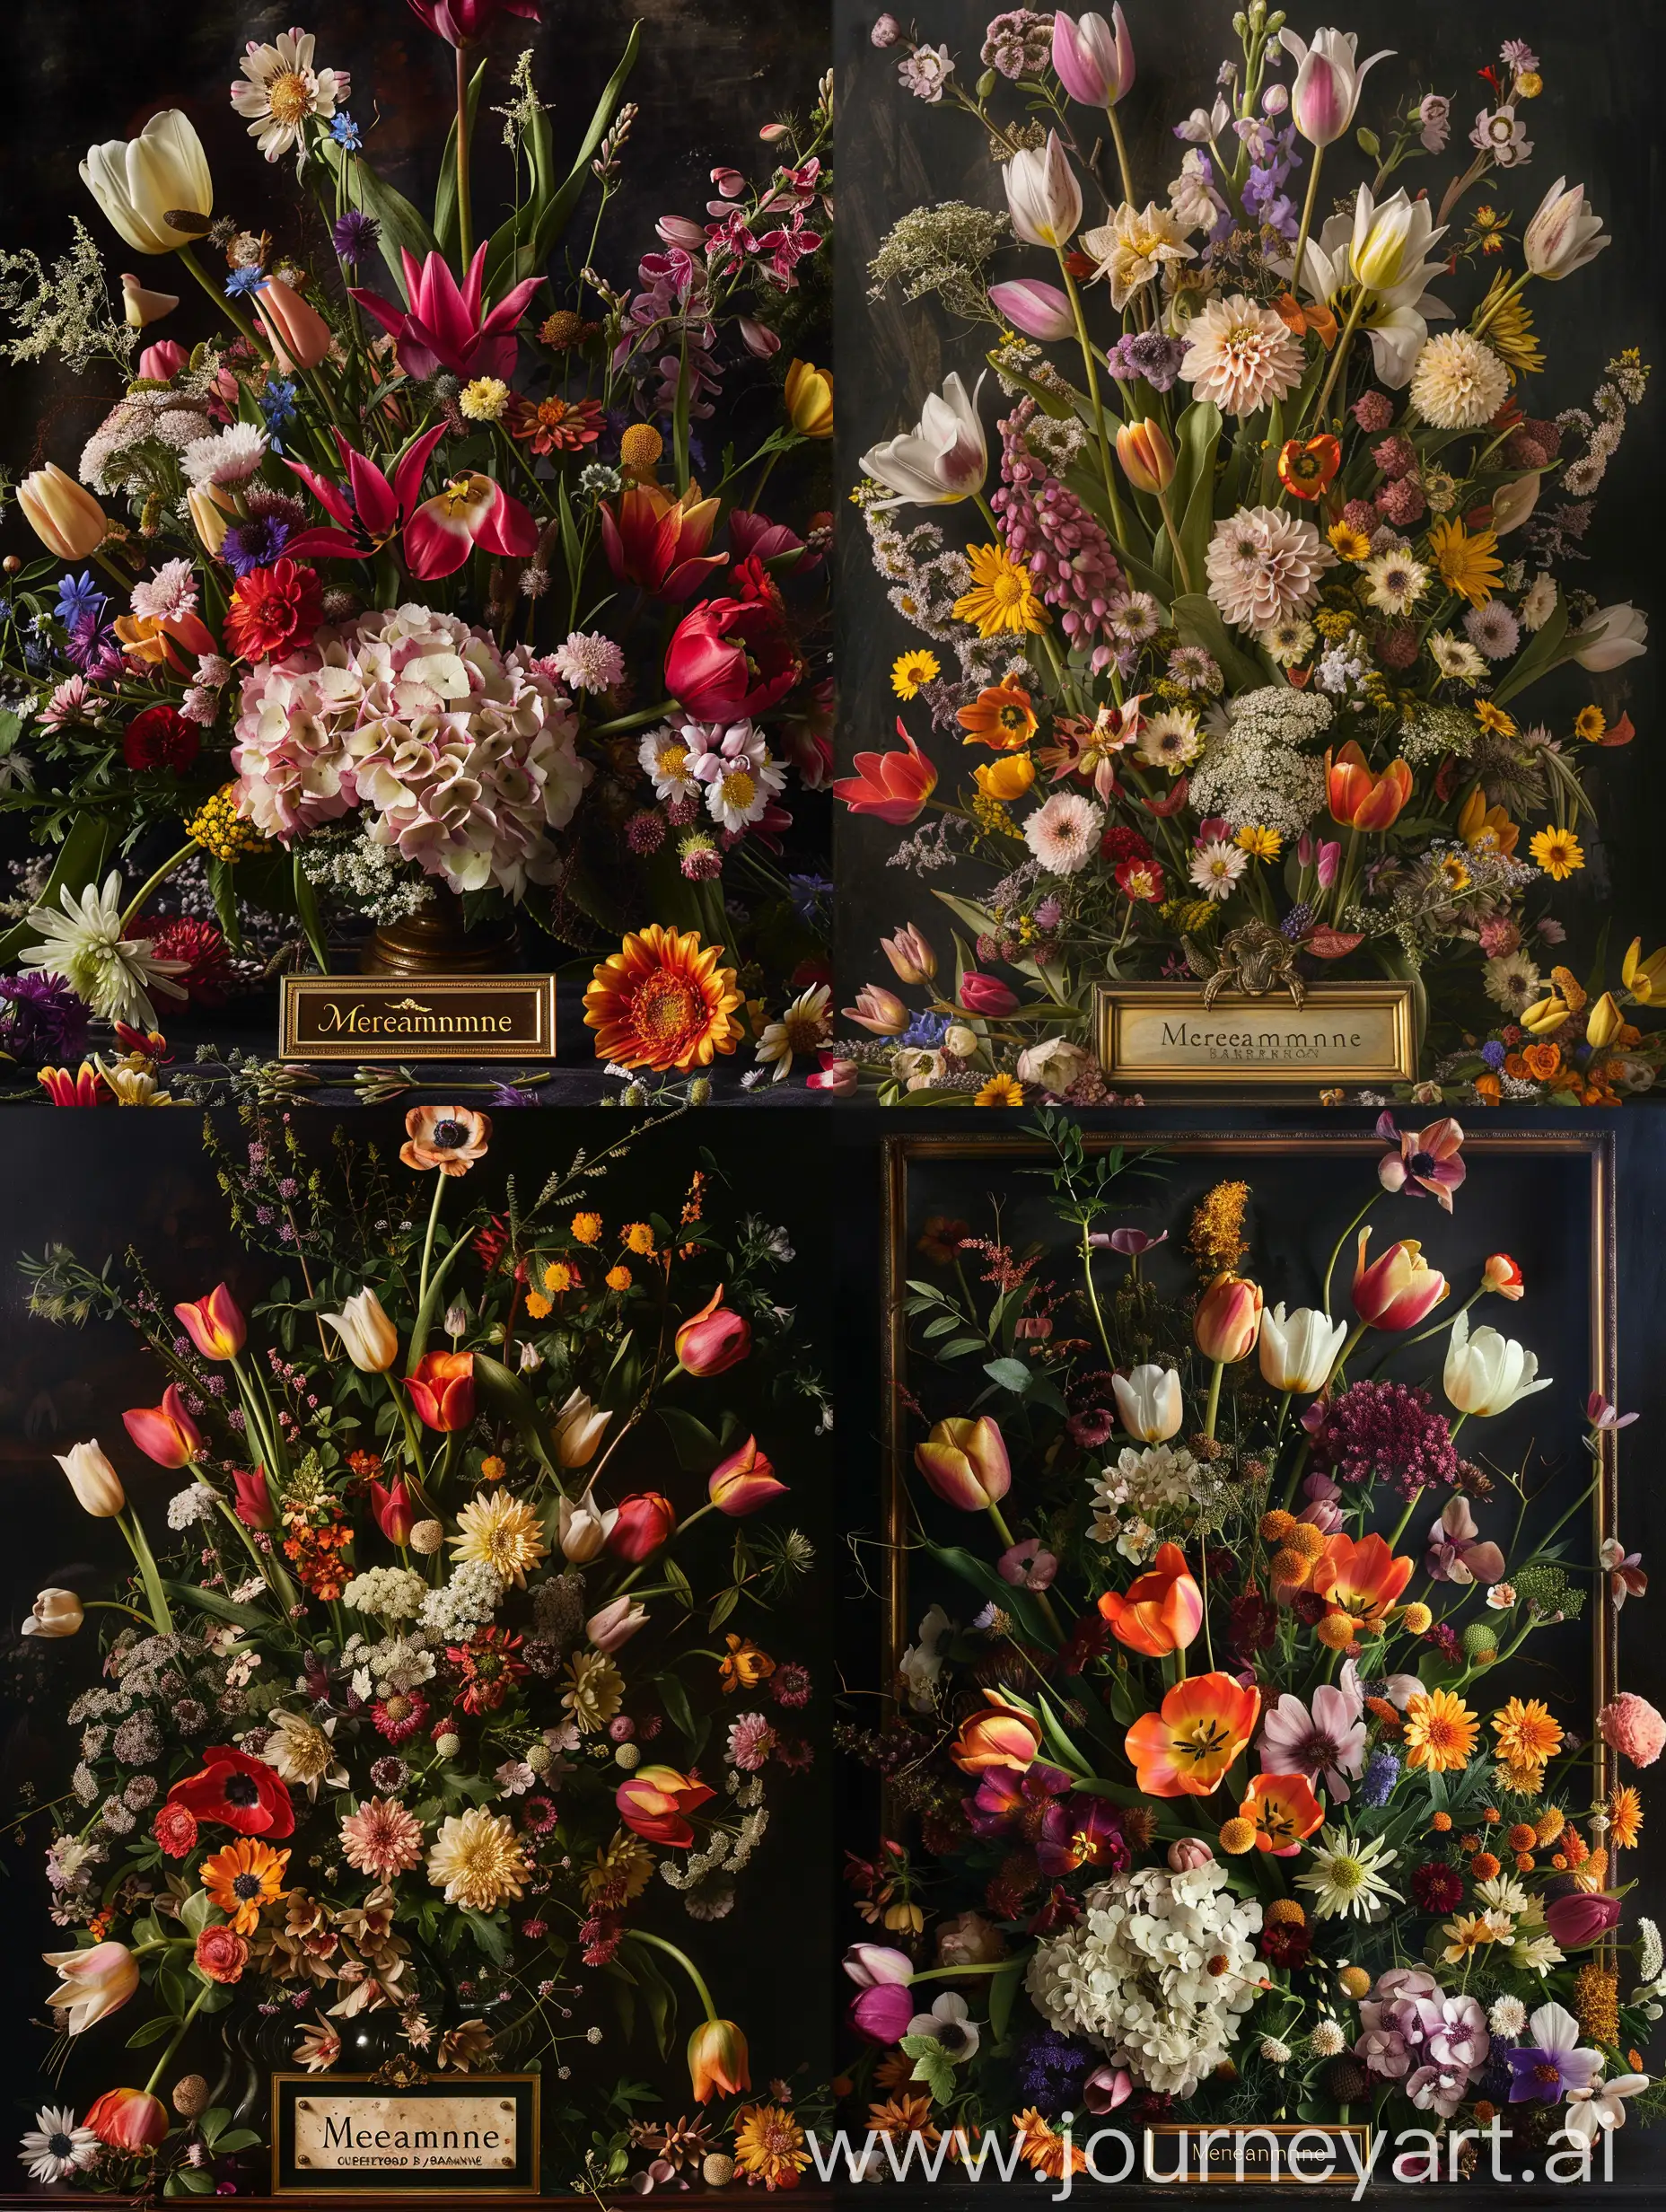 A lavish and intricate floral arrangement consisting of tulips, chrysanthemums, hydrangeas, and assorted wildflowers set against a rich, dark background. The composition exudes a Baroque-era aesthetic with a dramatic play of light and shadow highlighting the velvety textures and vivid colors of the petals. A gold-framed label with elegant script at the bottom center adds a classical touch, reading "Mereamnne - Curated by Girard Barrane," evoking a sense of timeless artistry and botanical sophistication. The entire scene captures a still life quality, reminiscent of 17th-century Dutch master paintings. --v 6 --style raw --ar 3:4